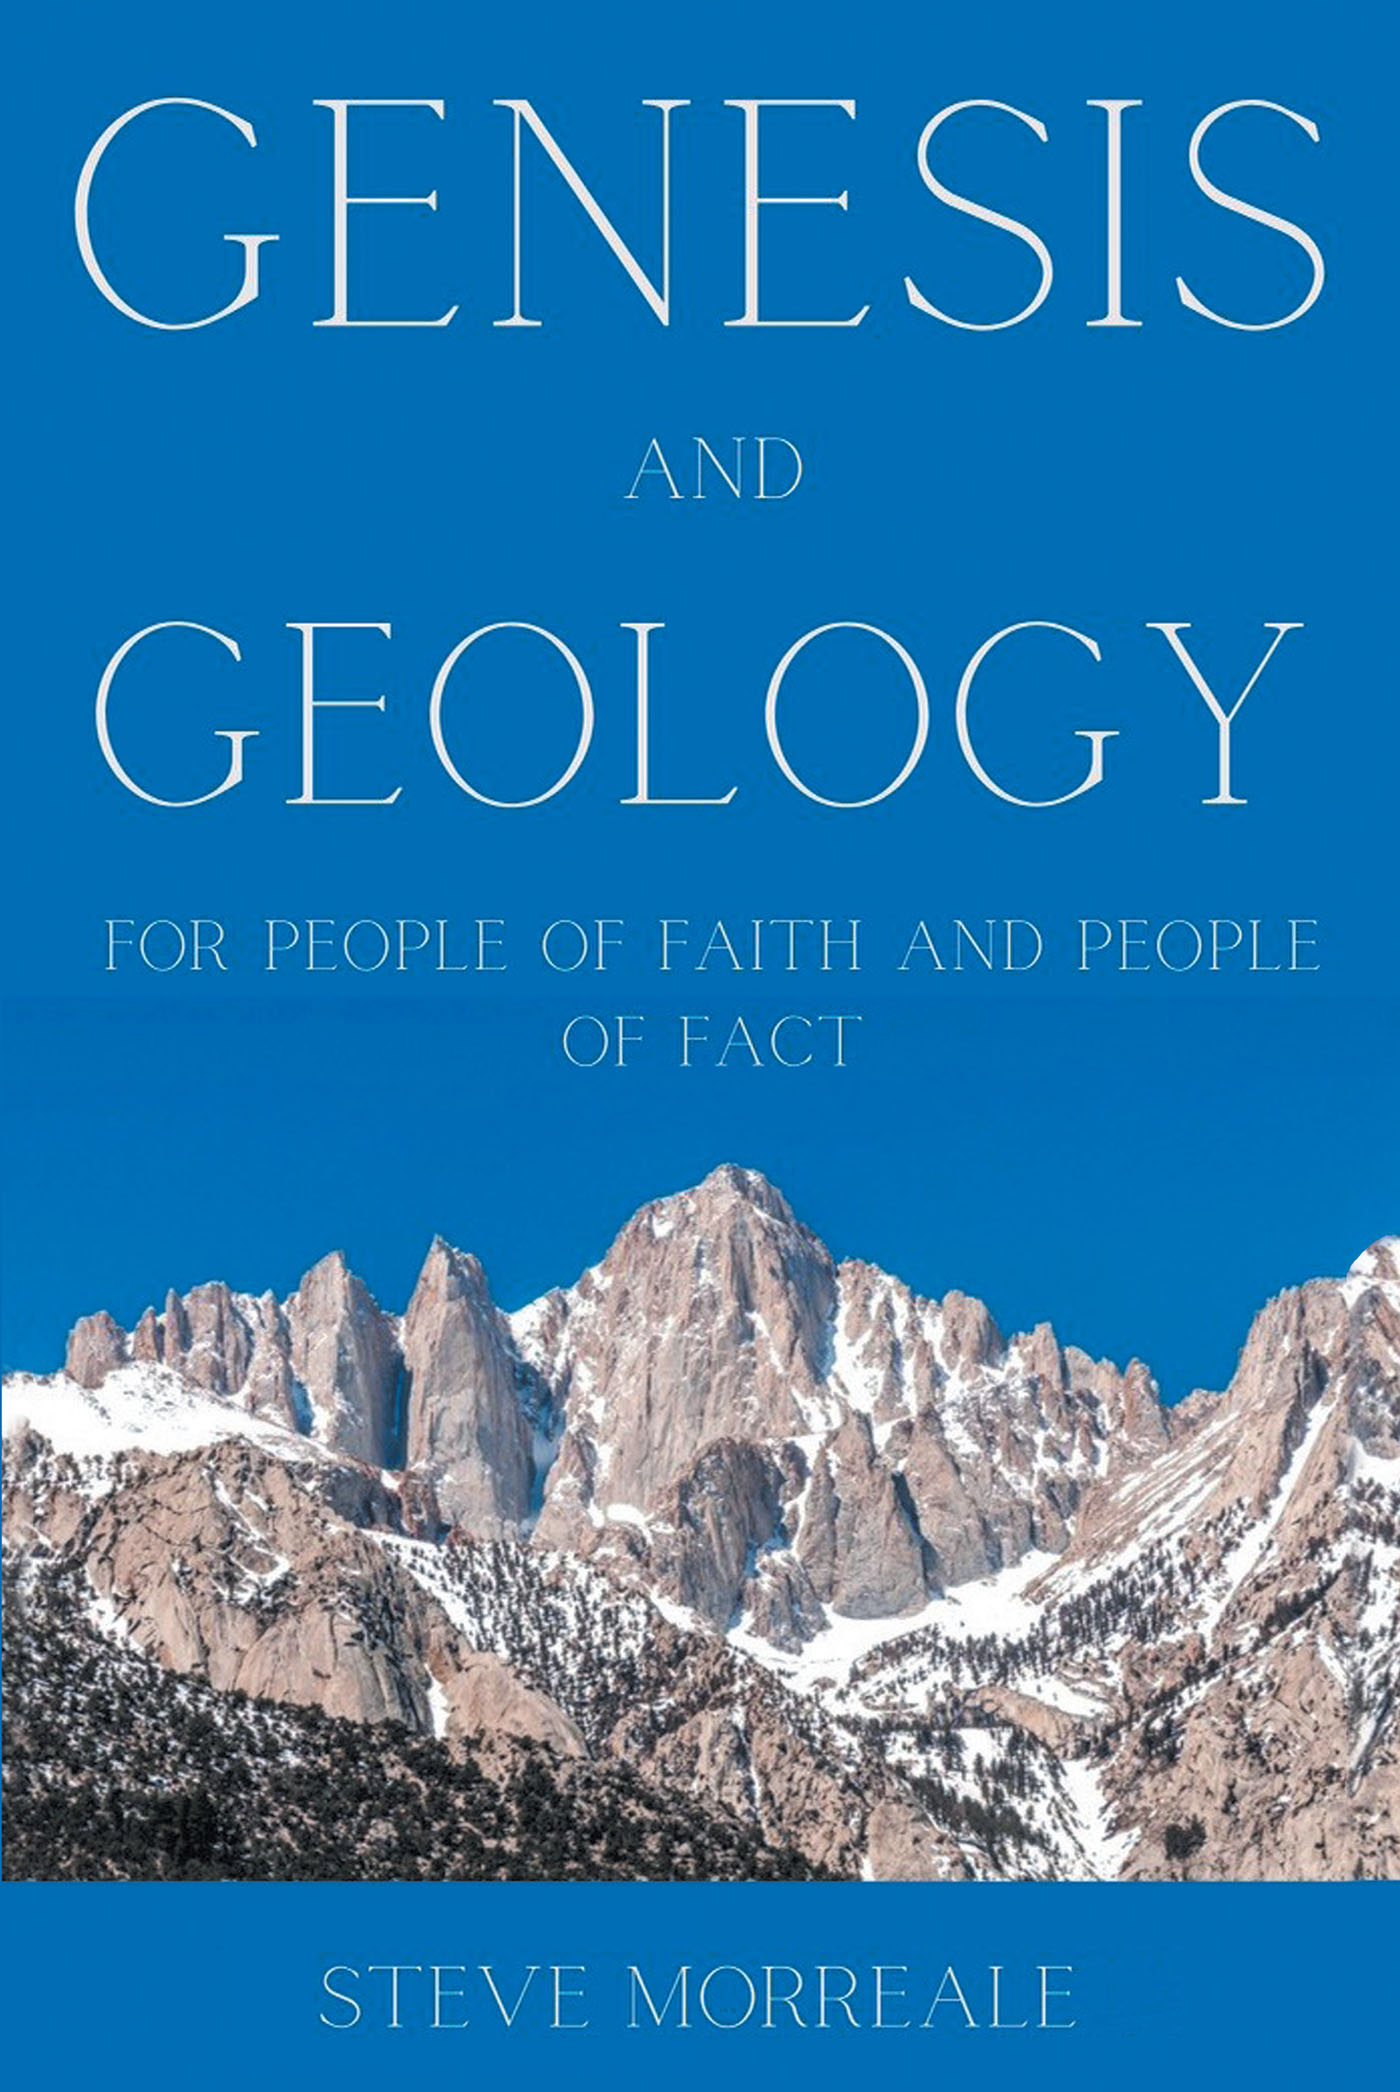 Steve Morreale’s Newly Released “Genesis and Geology For People of Faith and People of Fact” is a Helpful Discussion of Science and Religion Related to Creation